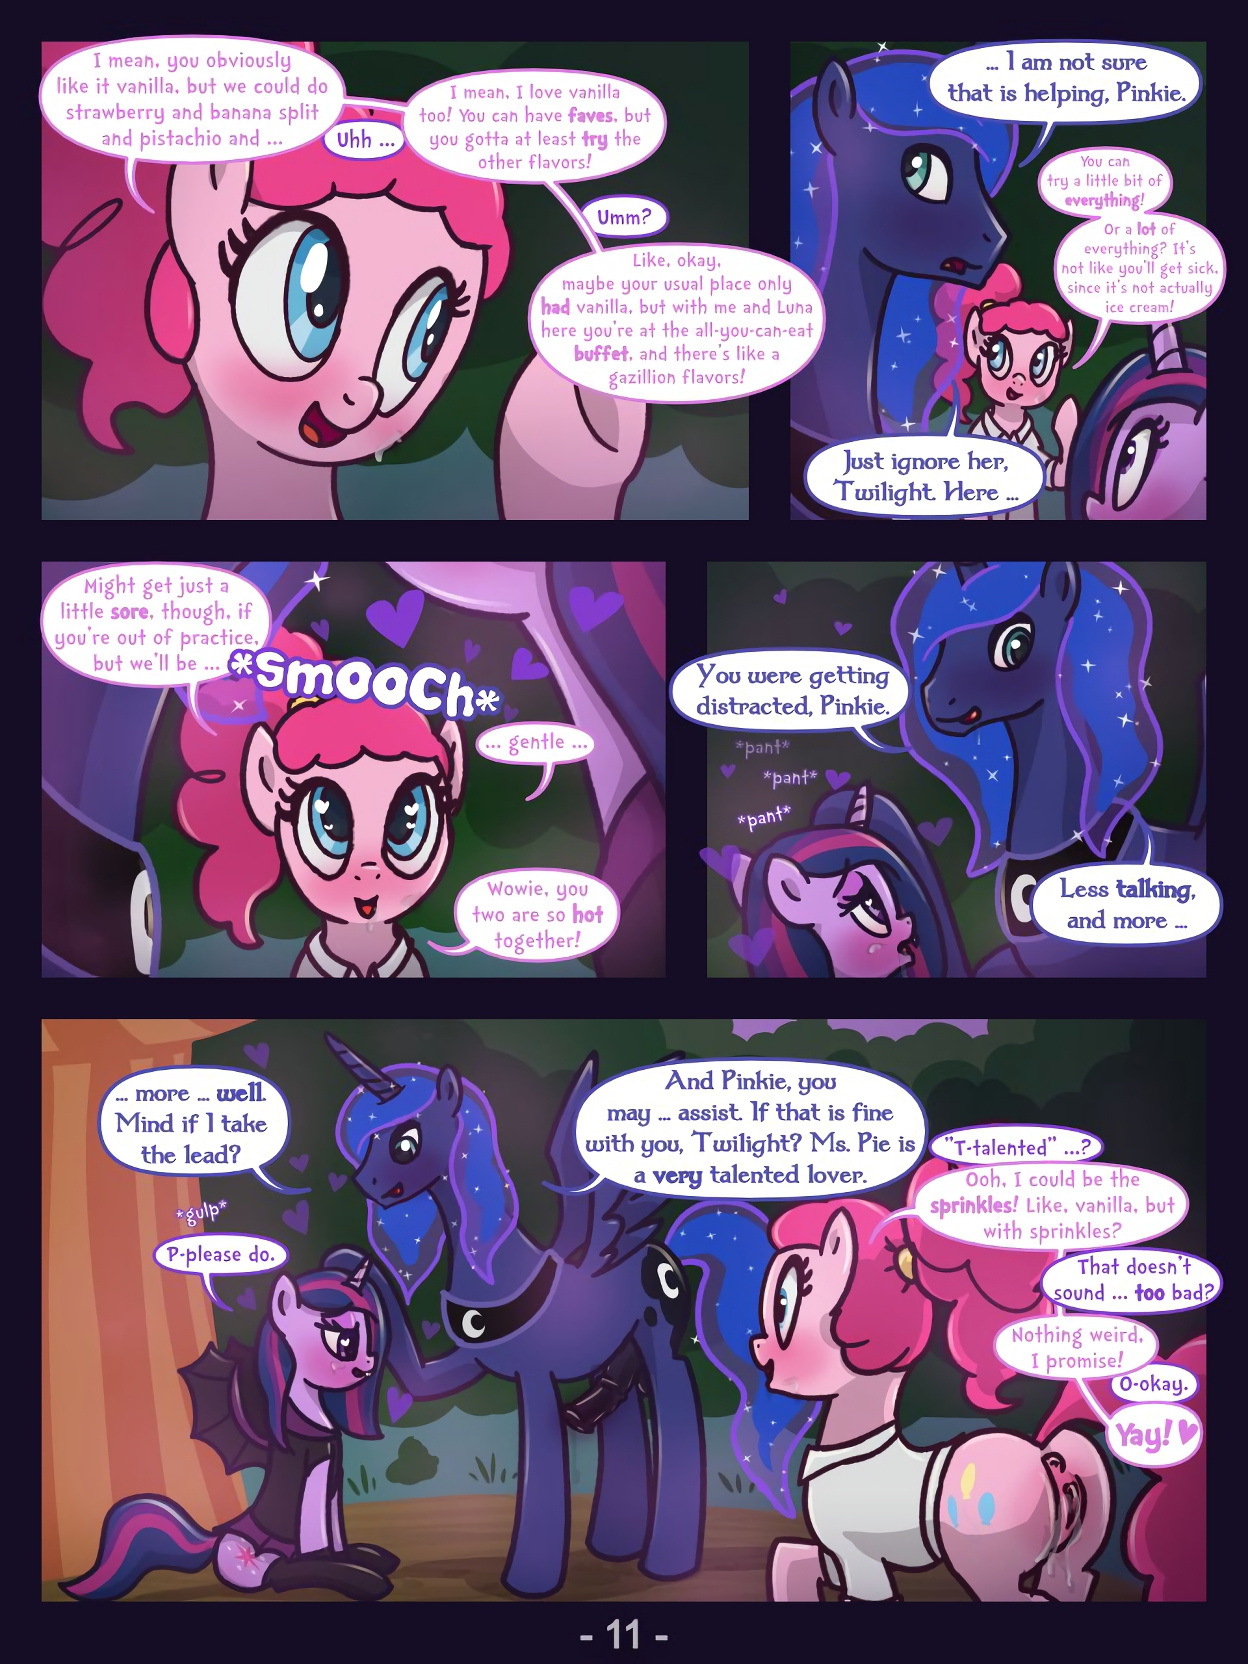 A Happy Nightmare Night - Page 11